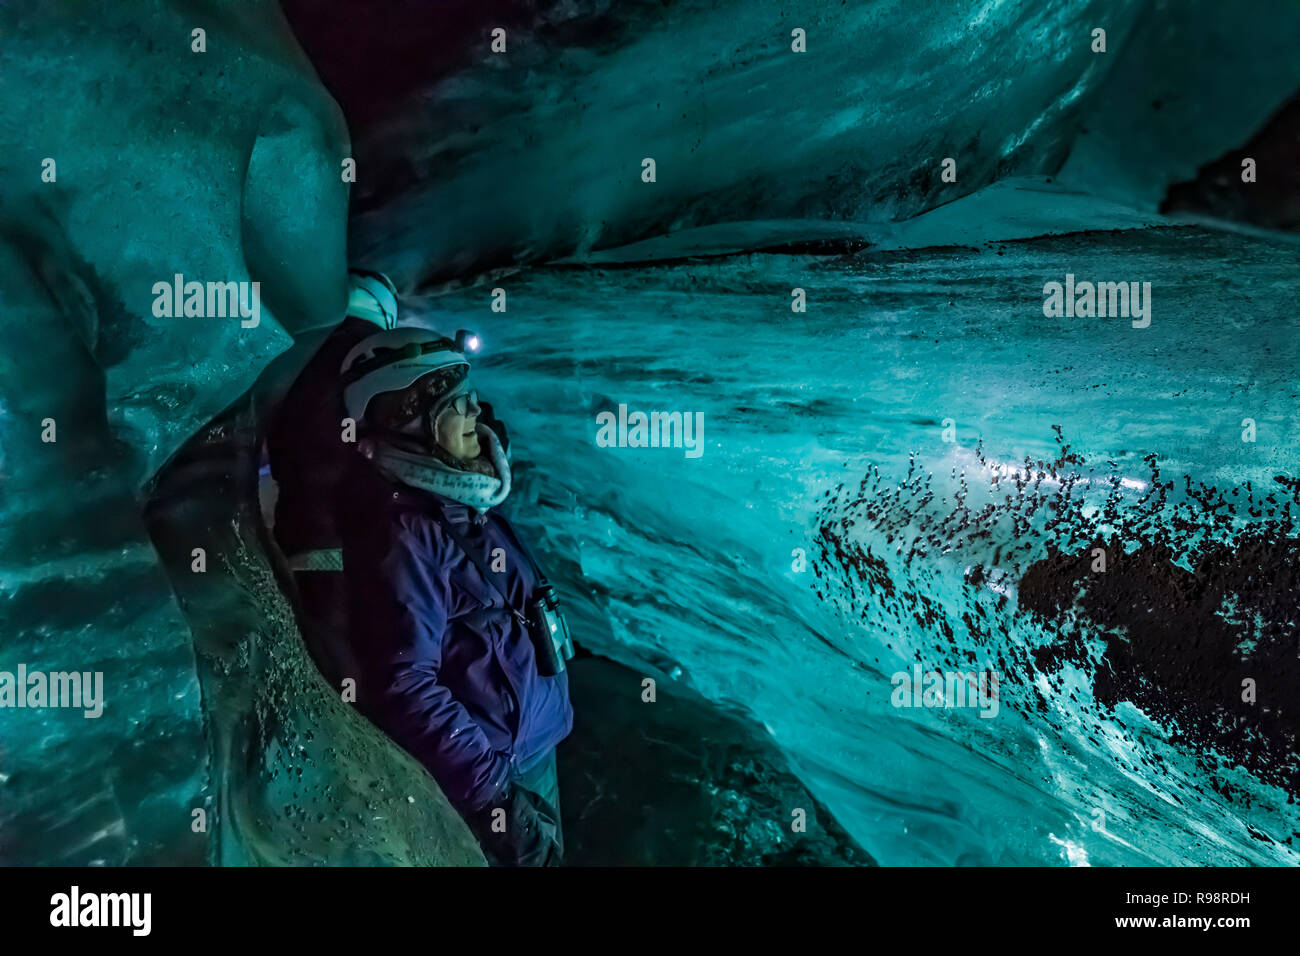 Karen Rentz on an ice cave tour to a lobe of Mýrdalsjökull Glacier, which sits atop Katla Volcano, in winter in Iceland Stock Photo